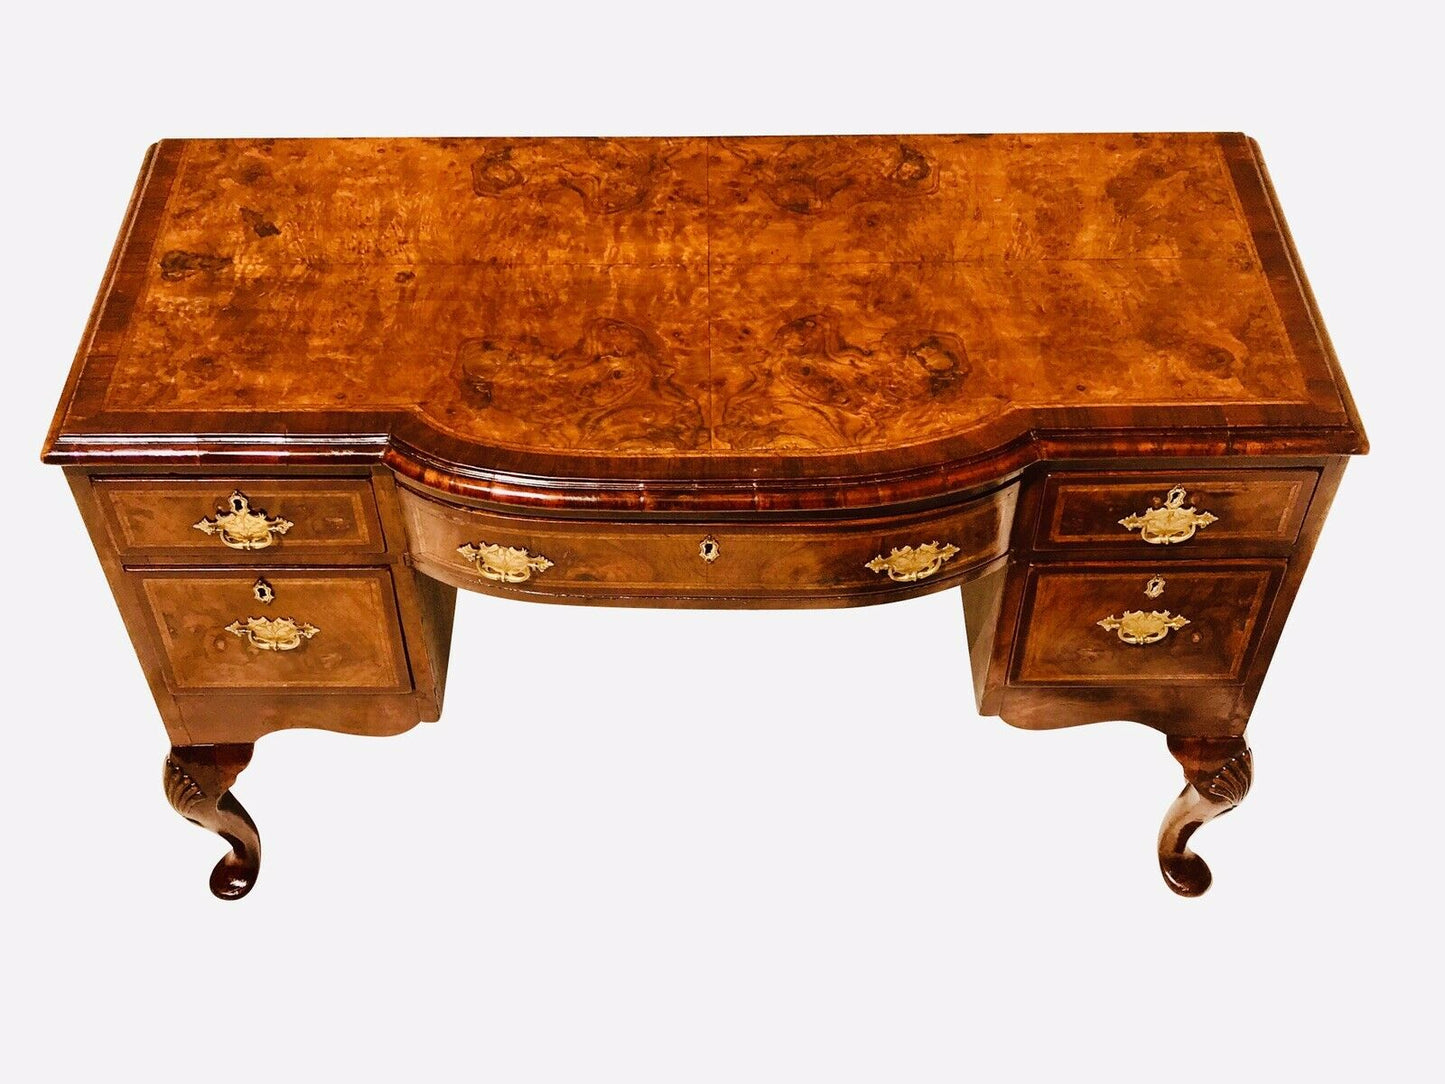 19TH C ANTIQUE ENGLISH QUEEN ANNE REVIVAL BURLED WALNUT DRESSING TABLE / VANITY